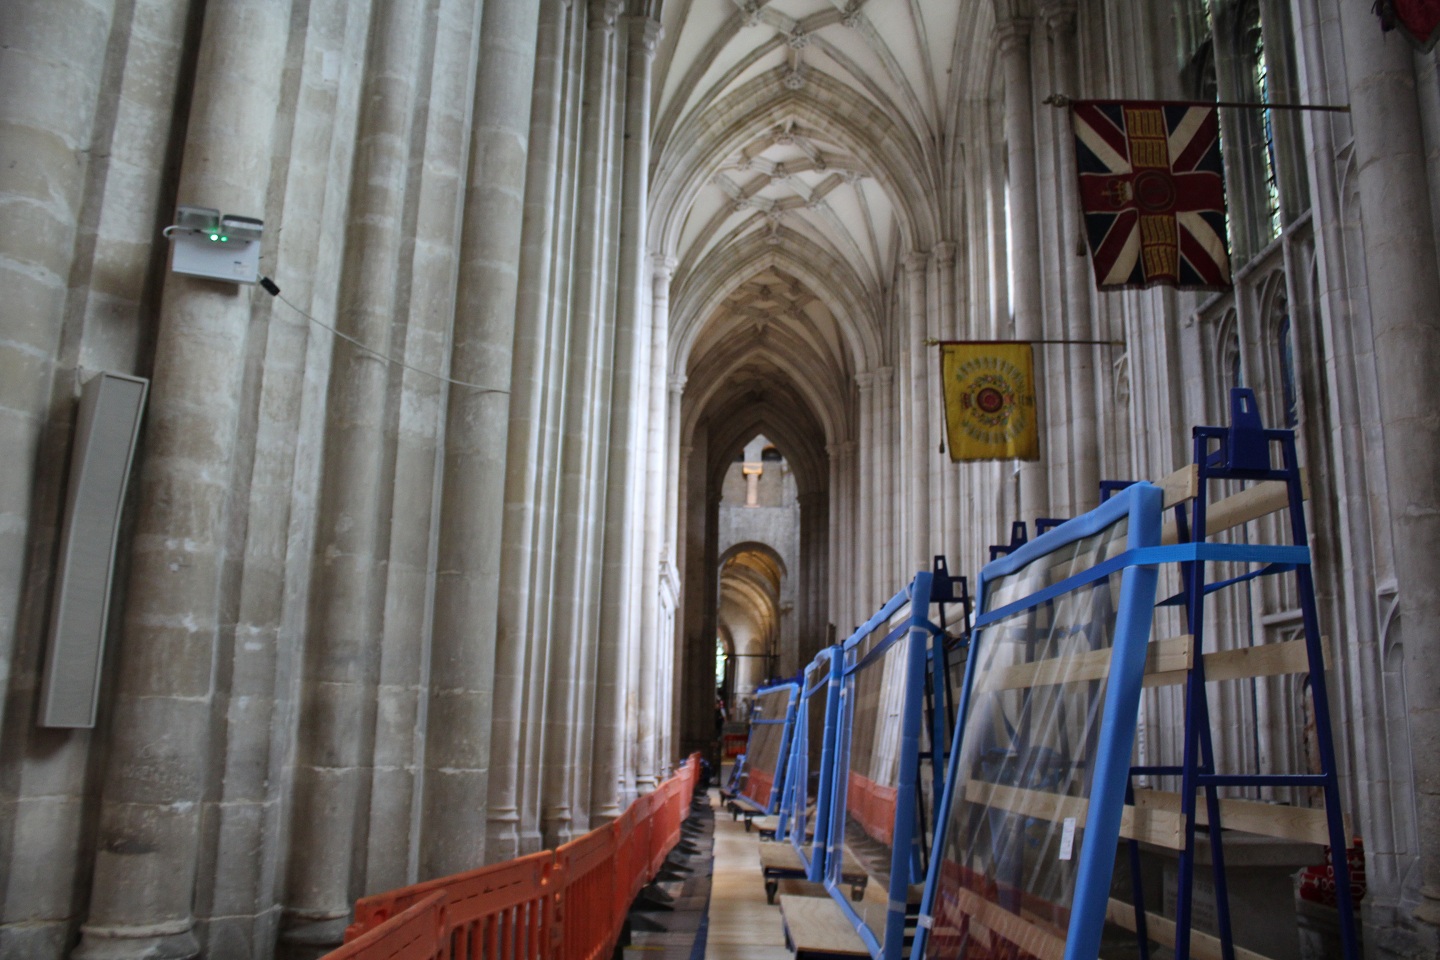 Image of the South Aisle of the cathedral showing the materials which will form the new lift.